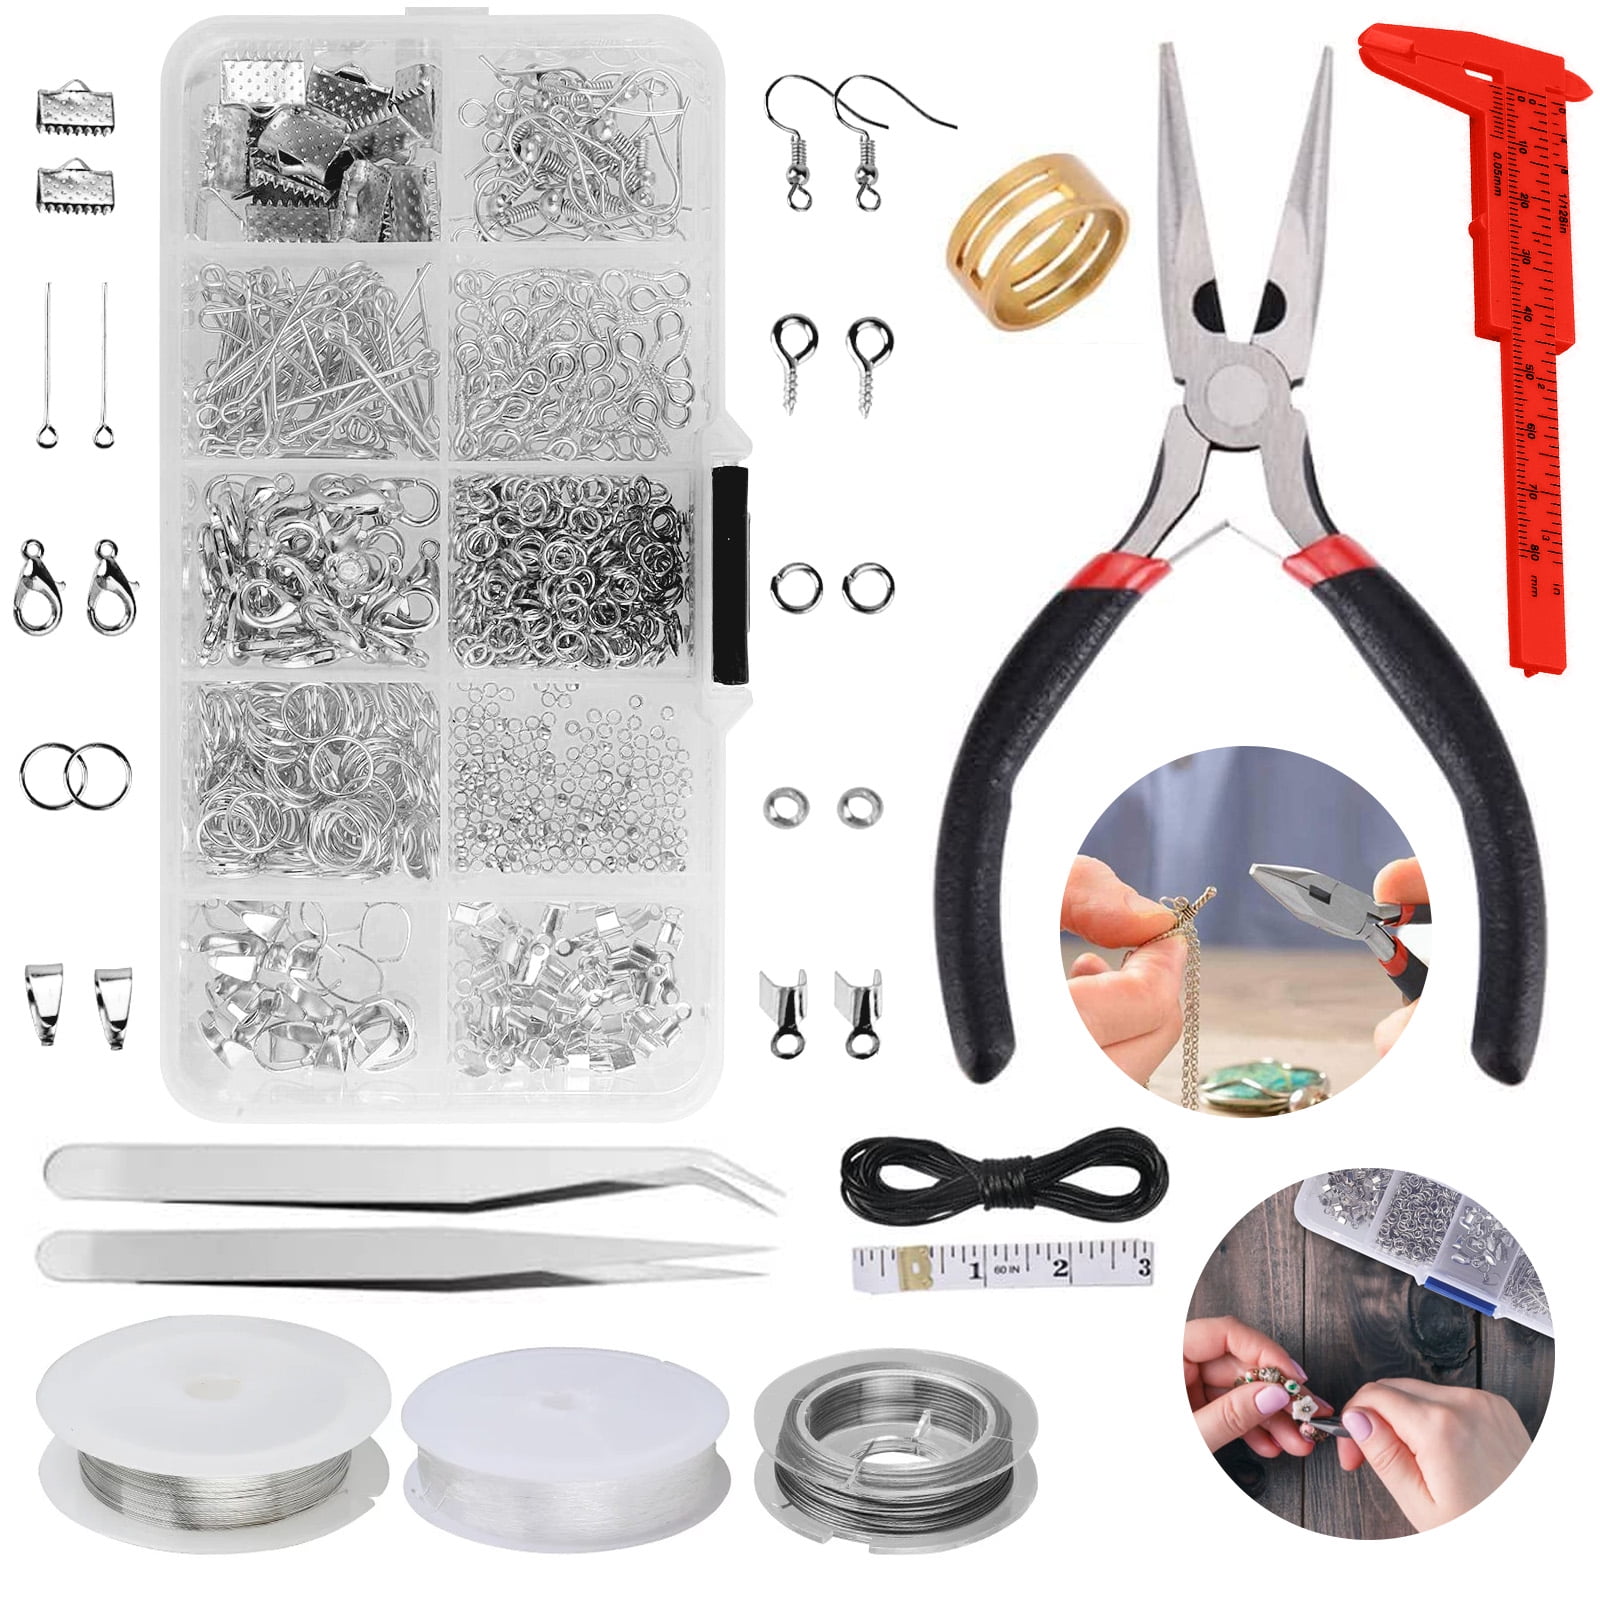 What are the must haves in your beading tools and supplies kit?